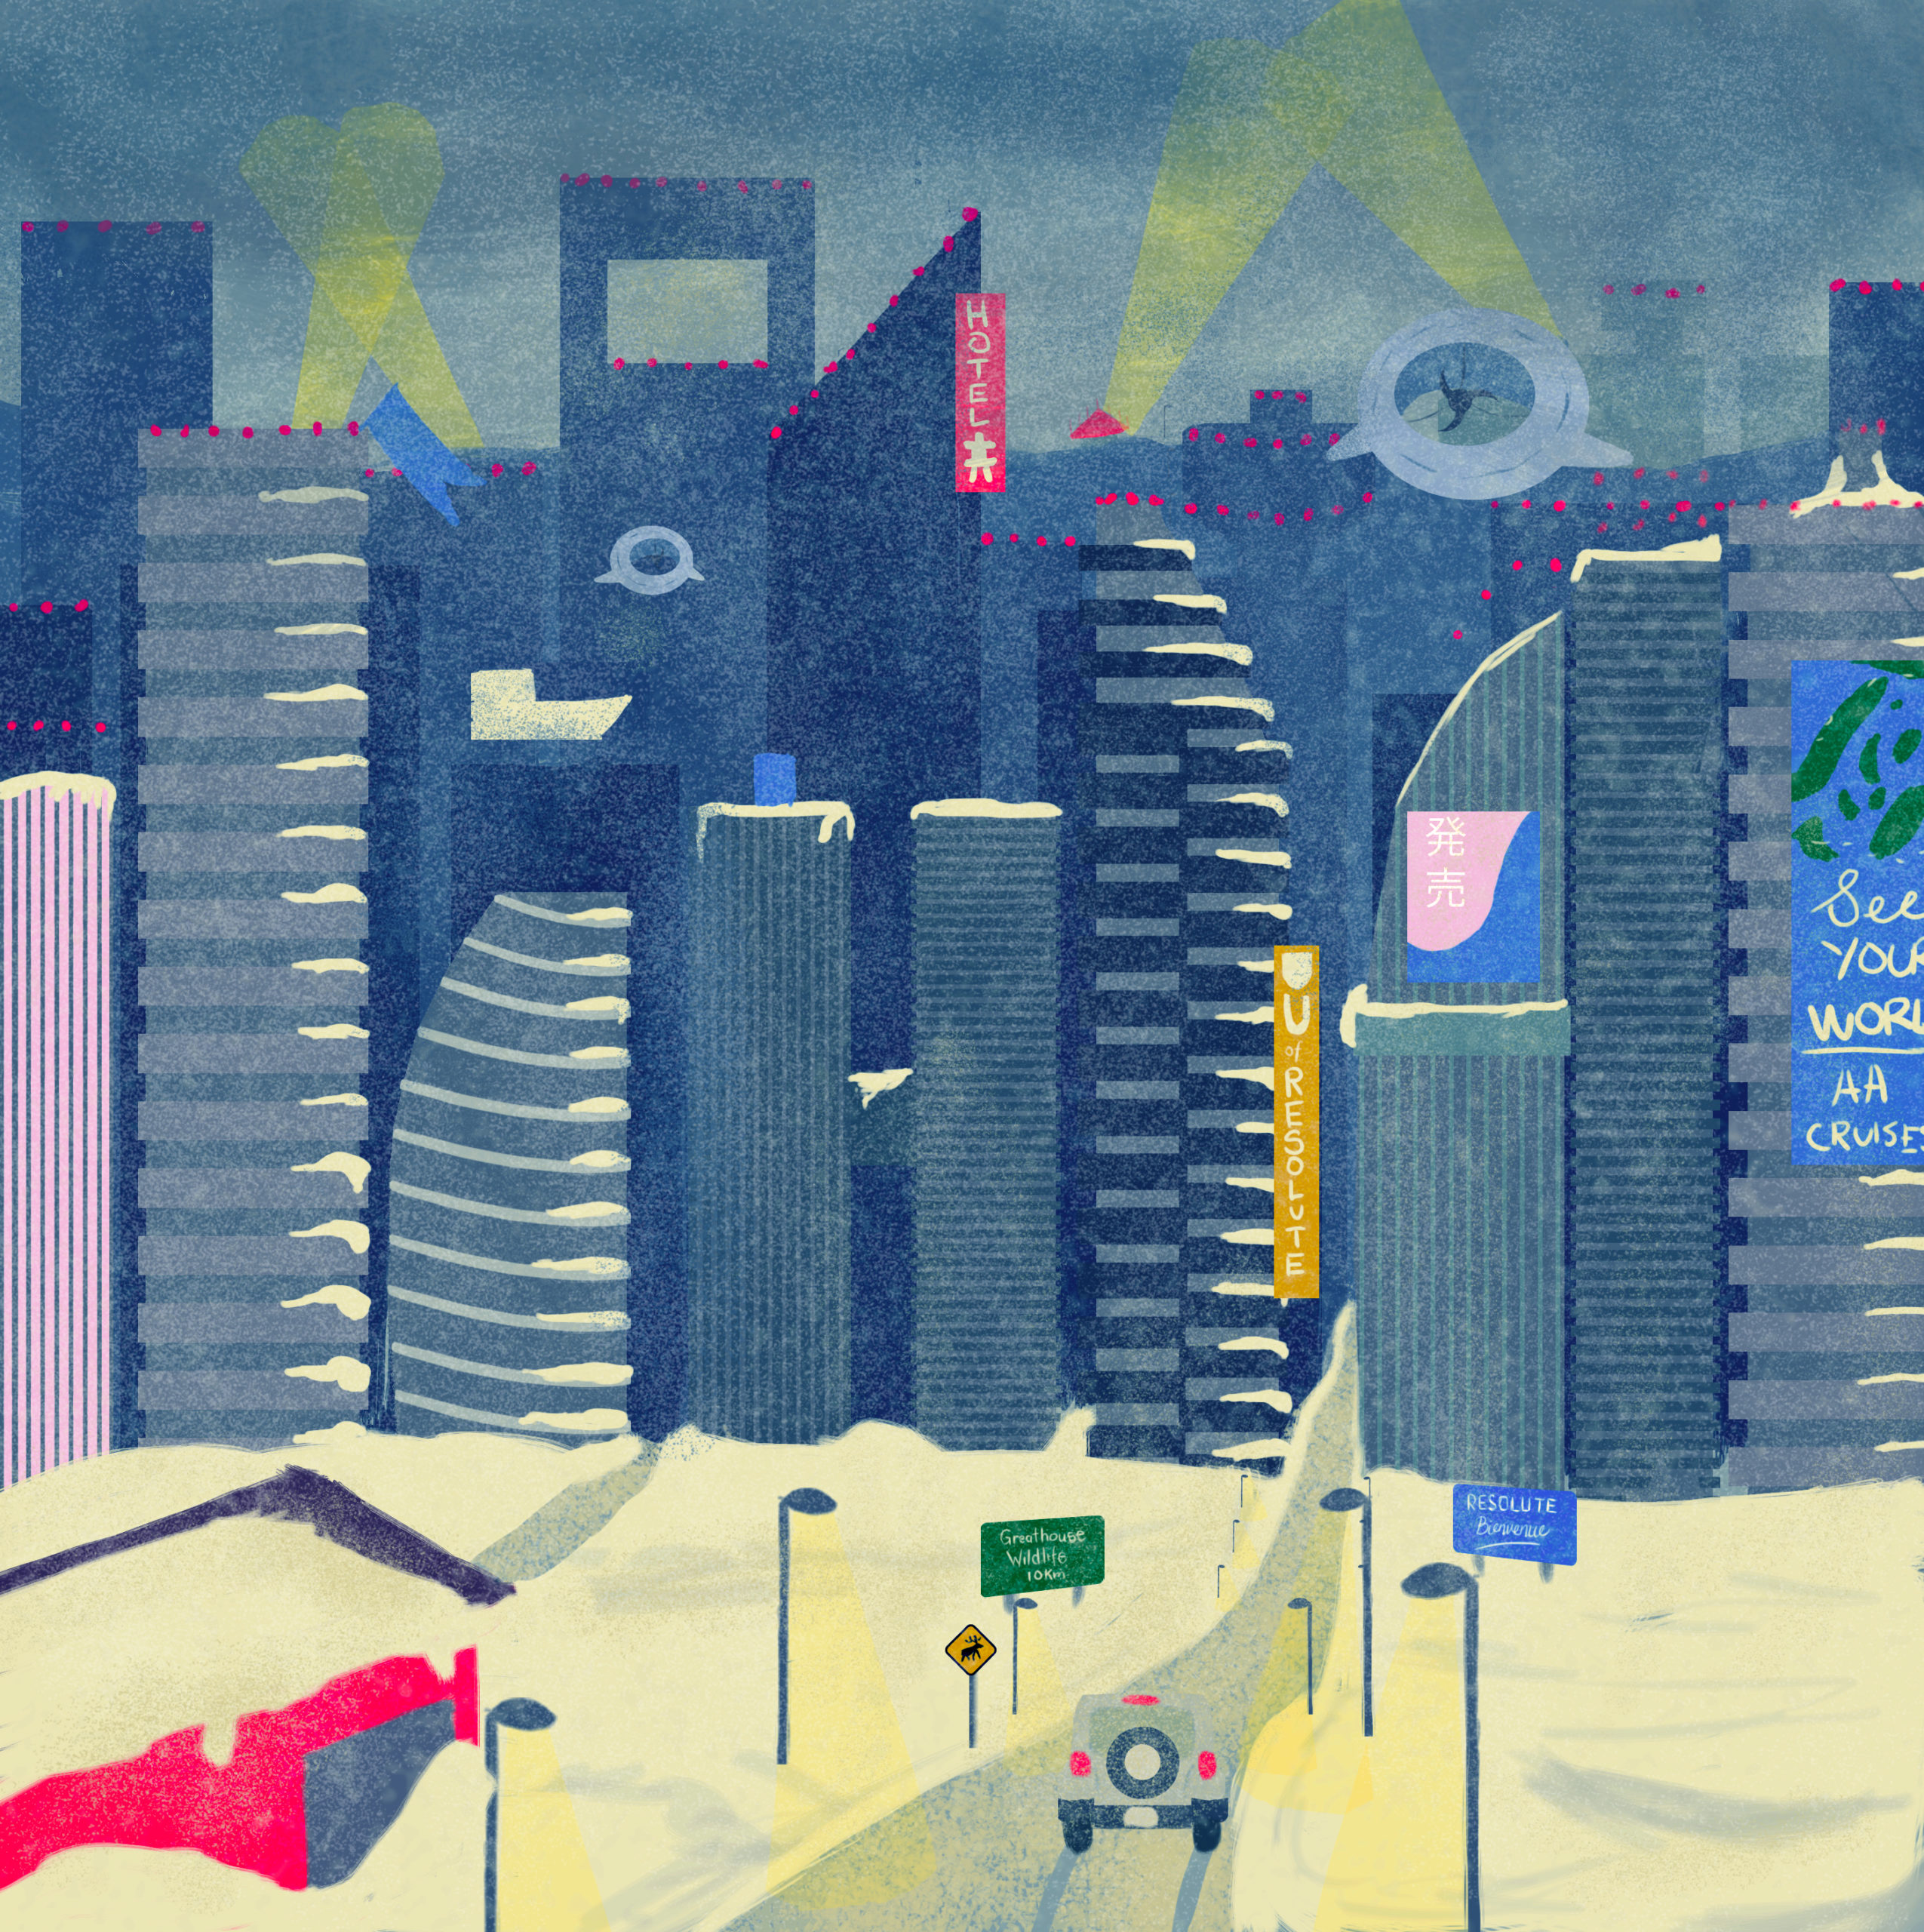 Detailed illustration of a futuristic city skyline, with buildings of unusual shapes, covered with snow. Wind turbines float through the air, and spotlights are visible in the distance. A jeep drives down a road heading into the city proper. The colour palette is cool, mostly consisting of blues. The art style is lineless and intricate.